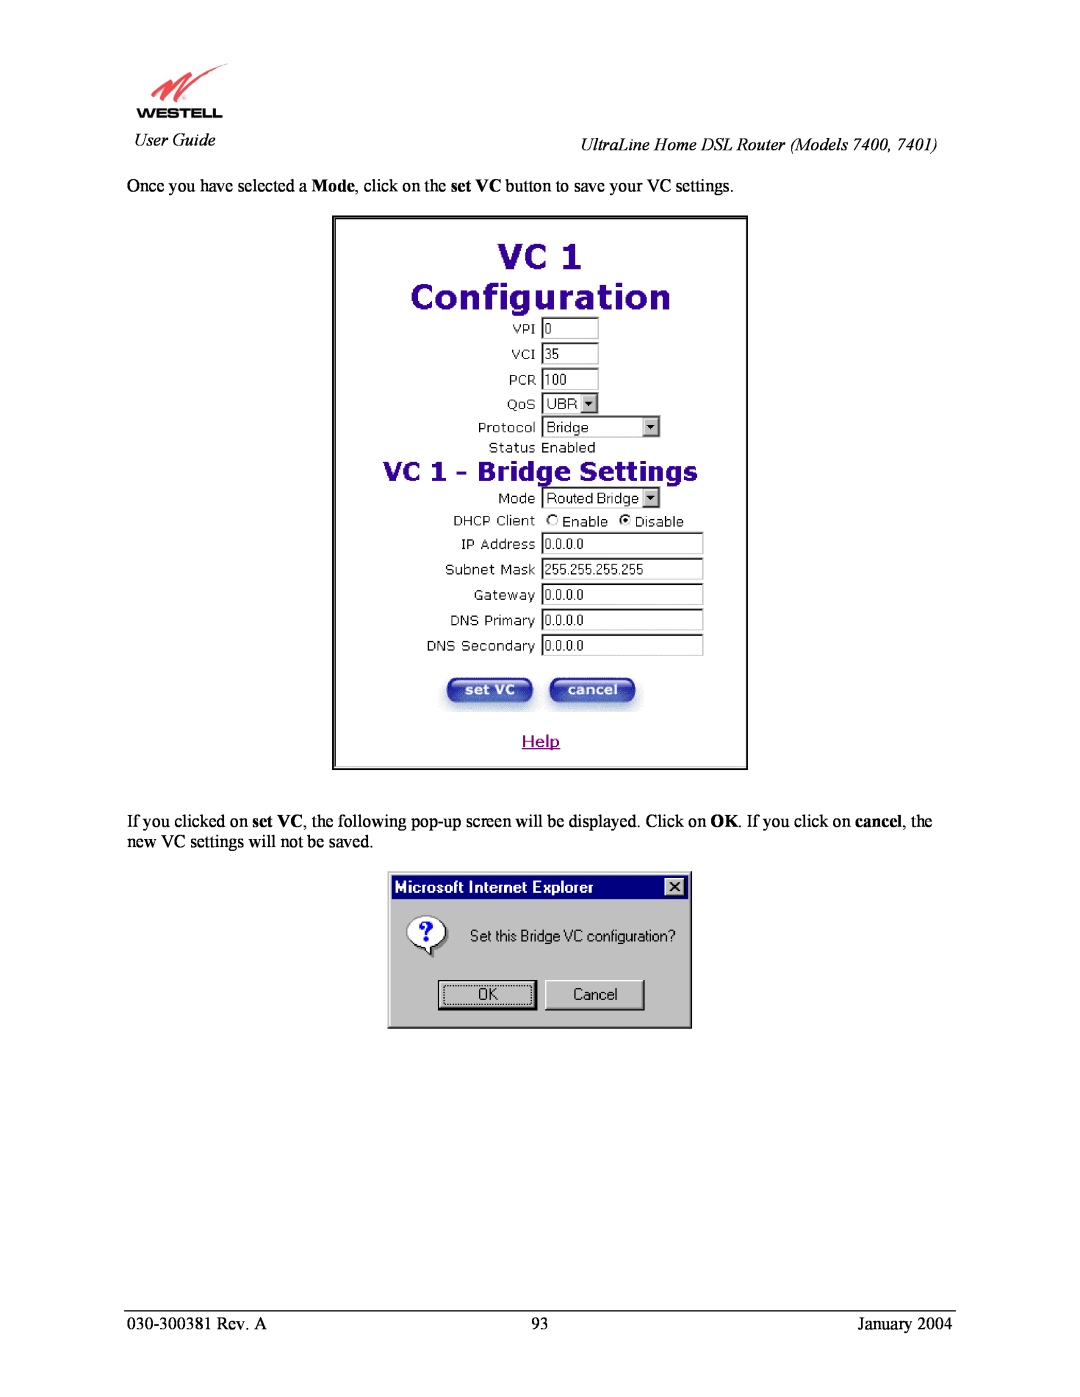 Westell Technologies 7401 manual User Guide, UltraLine Home DSL Router Models 7400, 030-300381 Rev. A, January 